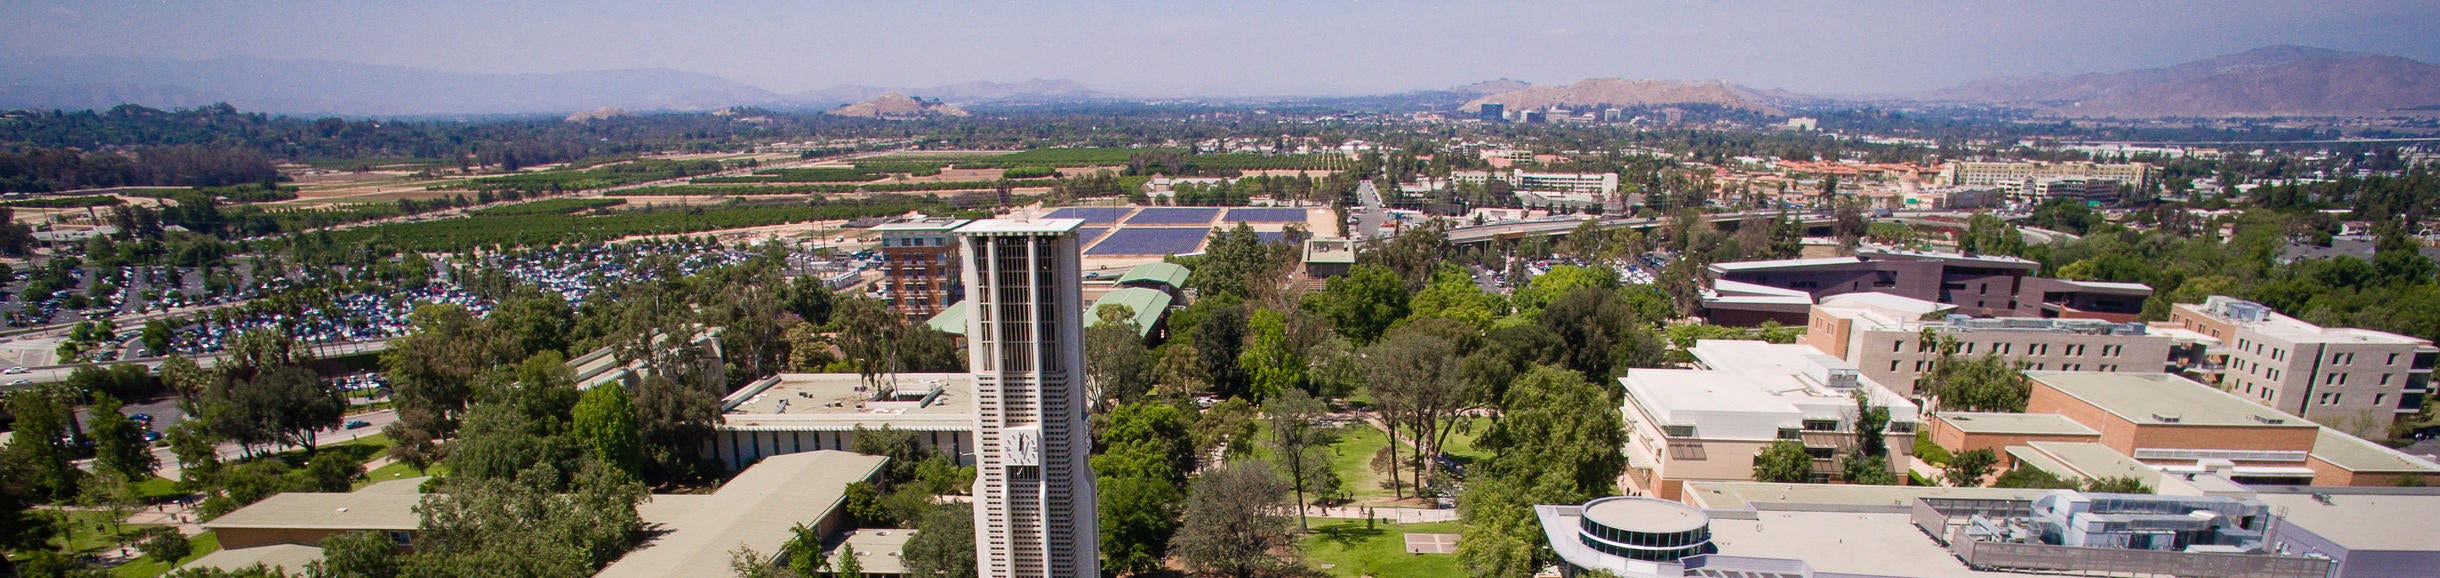 Aerial Image of UCR with the Belltower, hub and mountain-scape